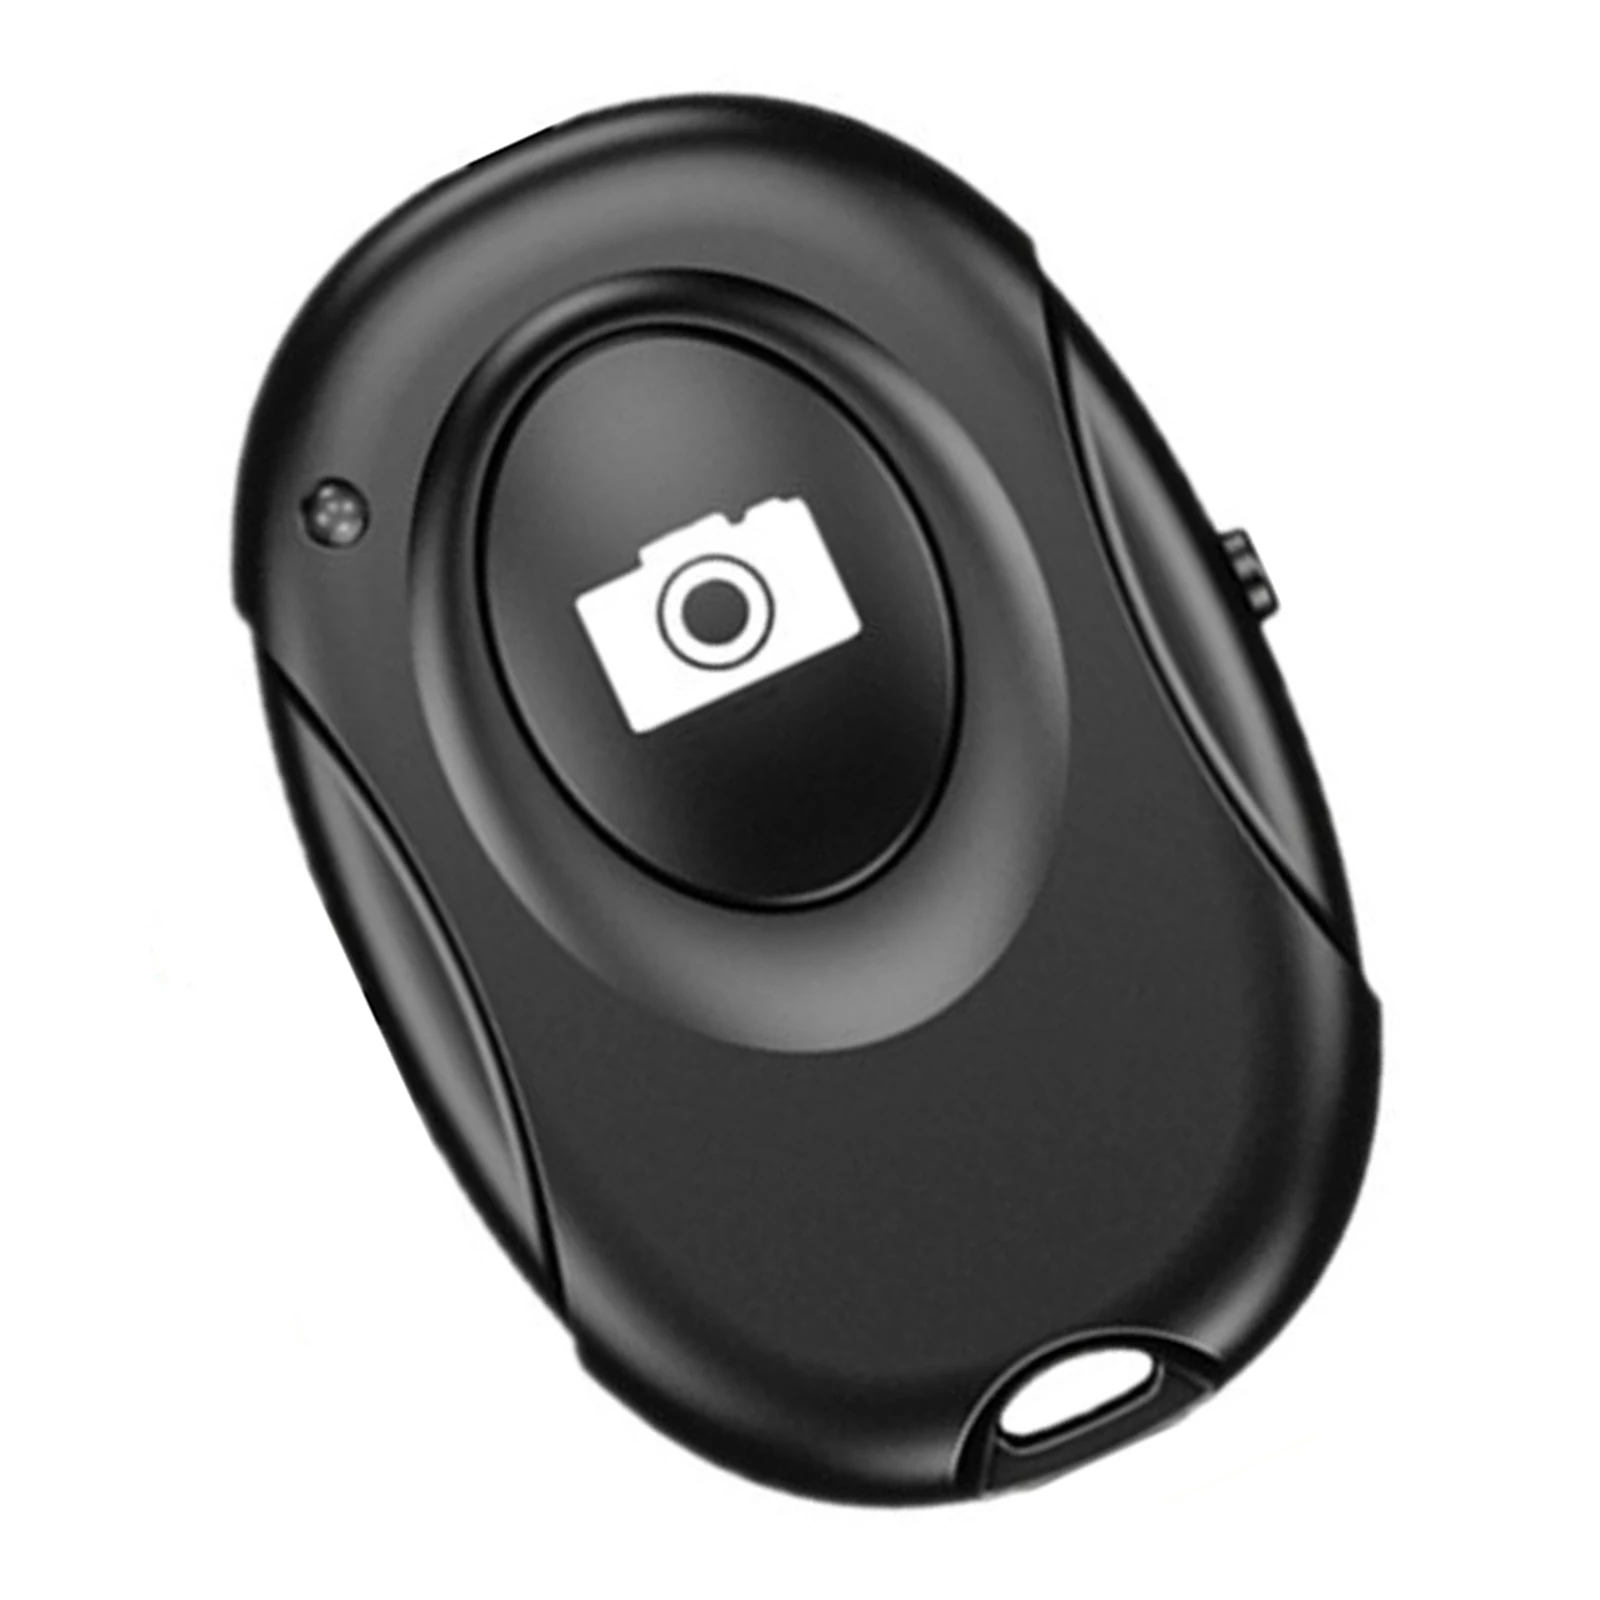 Bluetooth Remote Shutter for IOS/Android, Multifunctional Remote Page Turner for Tiktok Smartphones Scrolling.